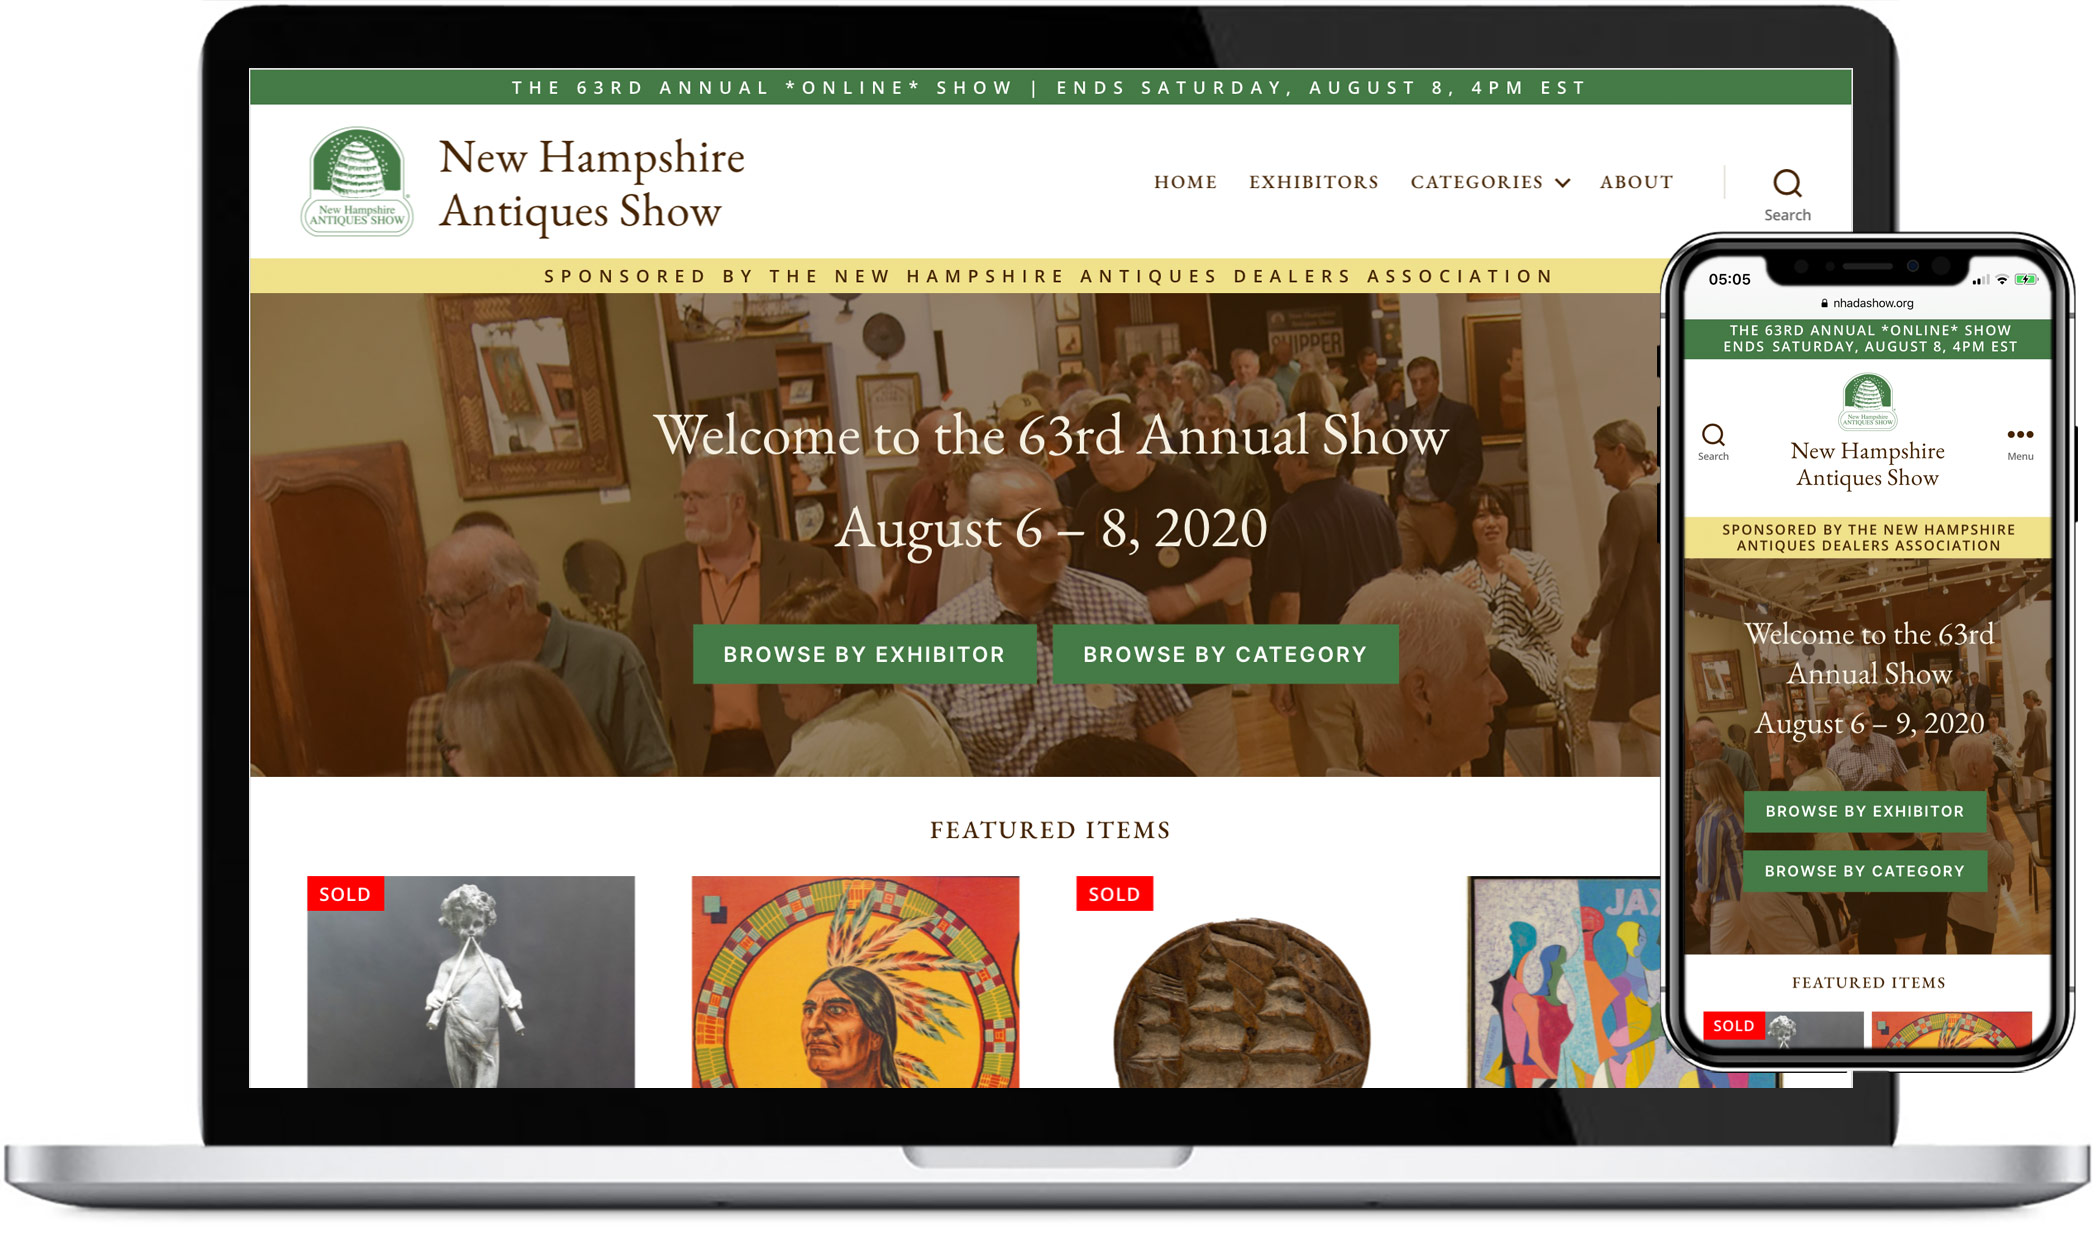 New Hampshire Antiques Show - Home Page